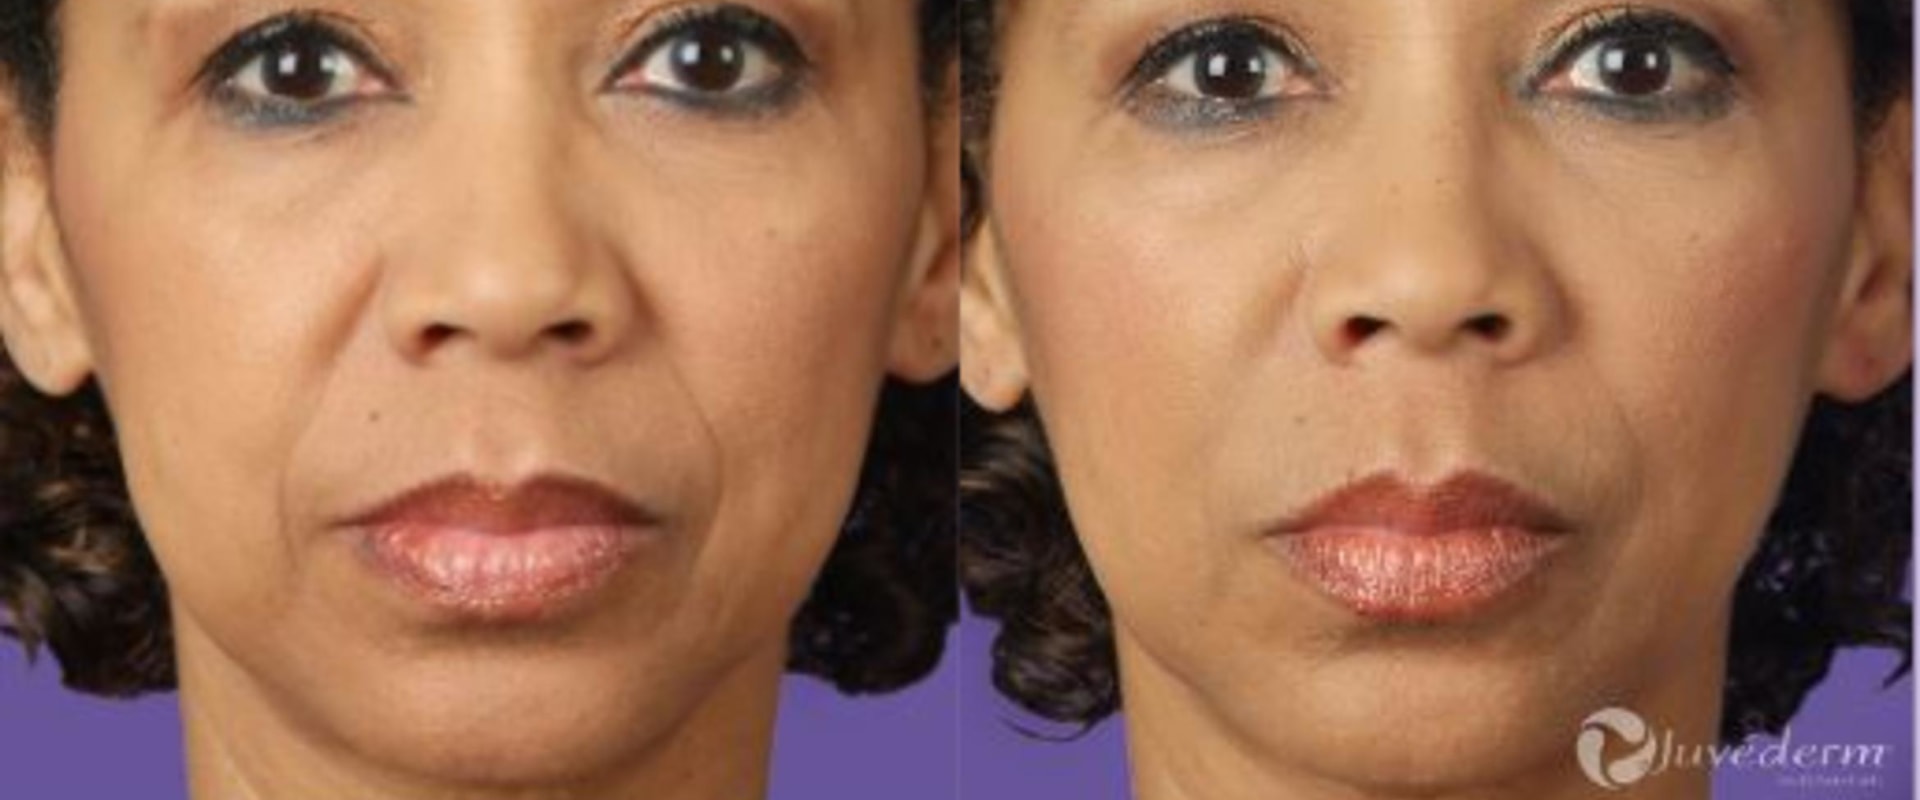 How long does juvederm take to settle?